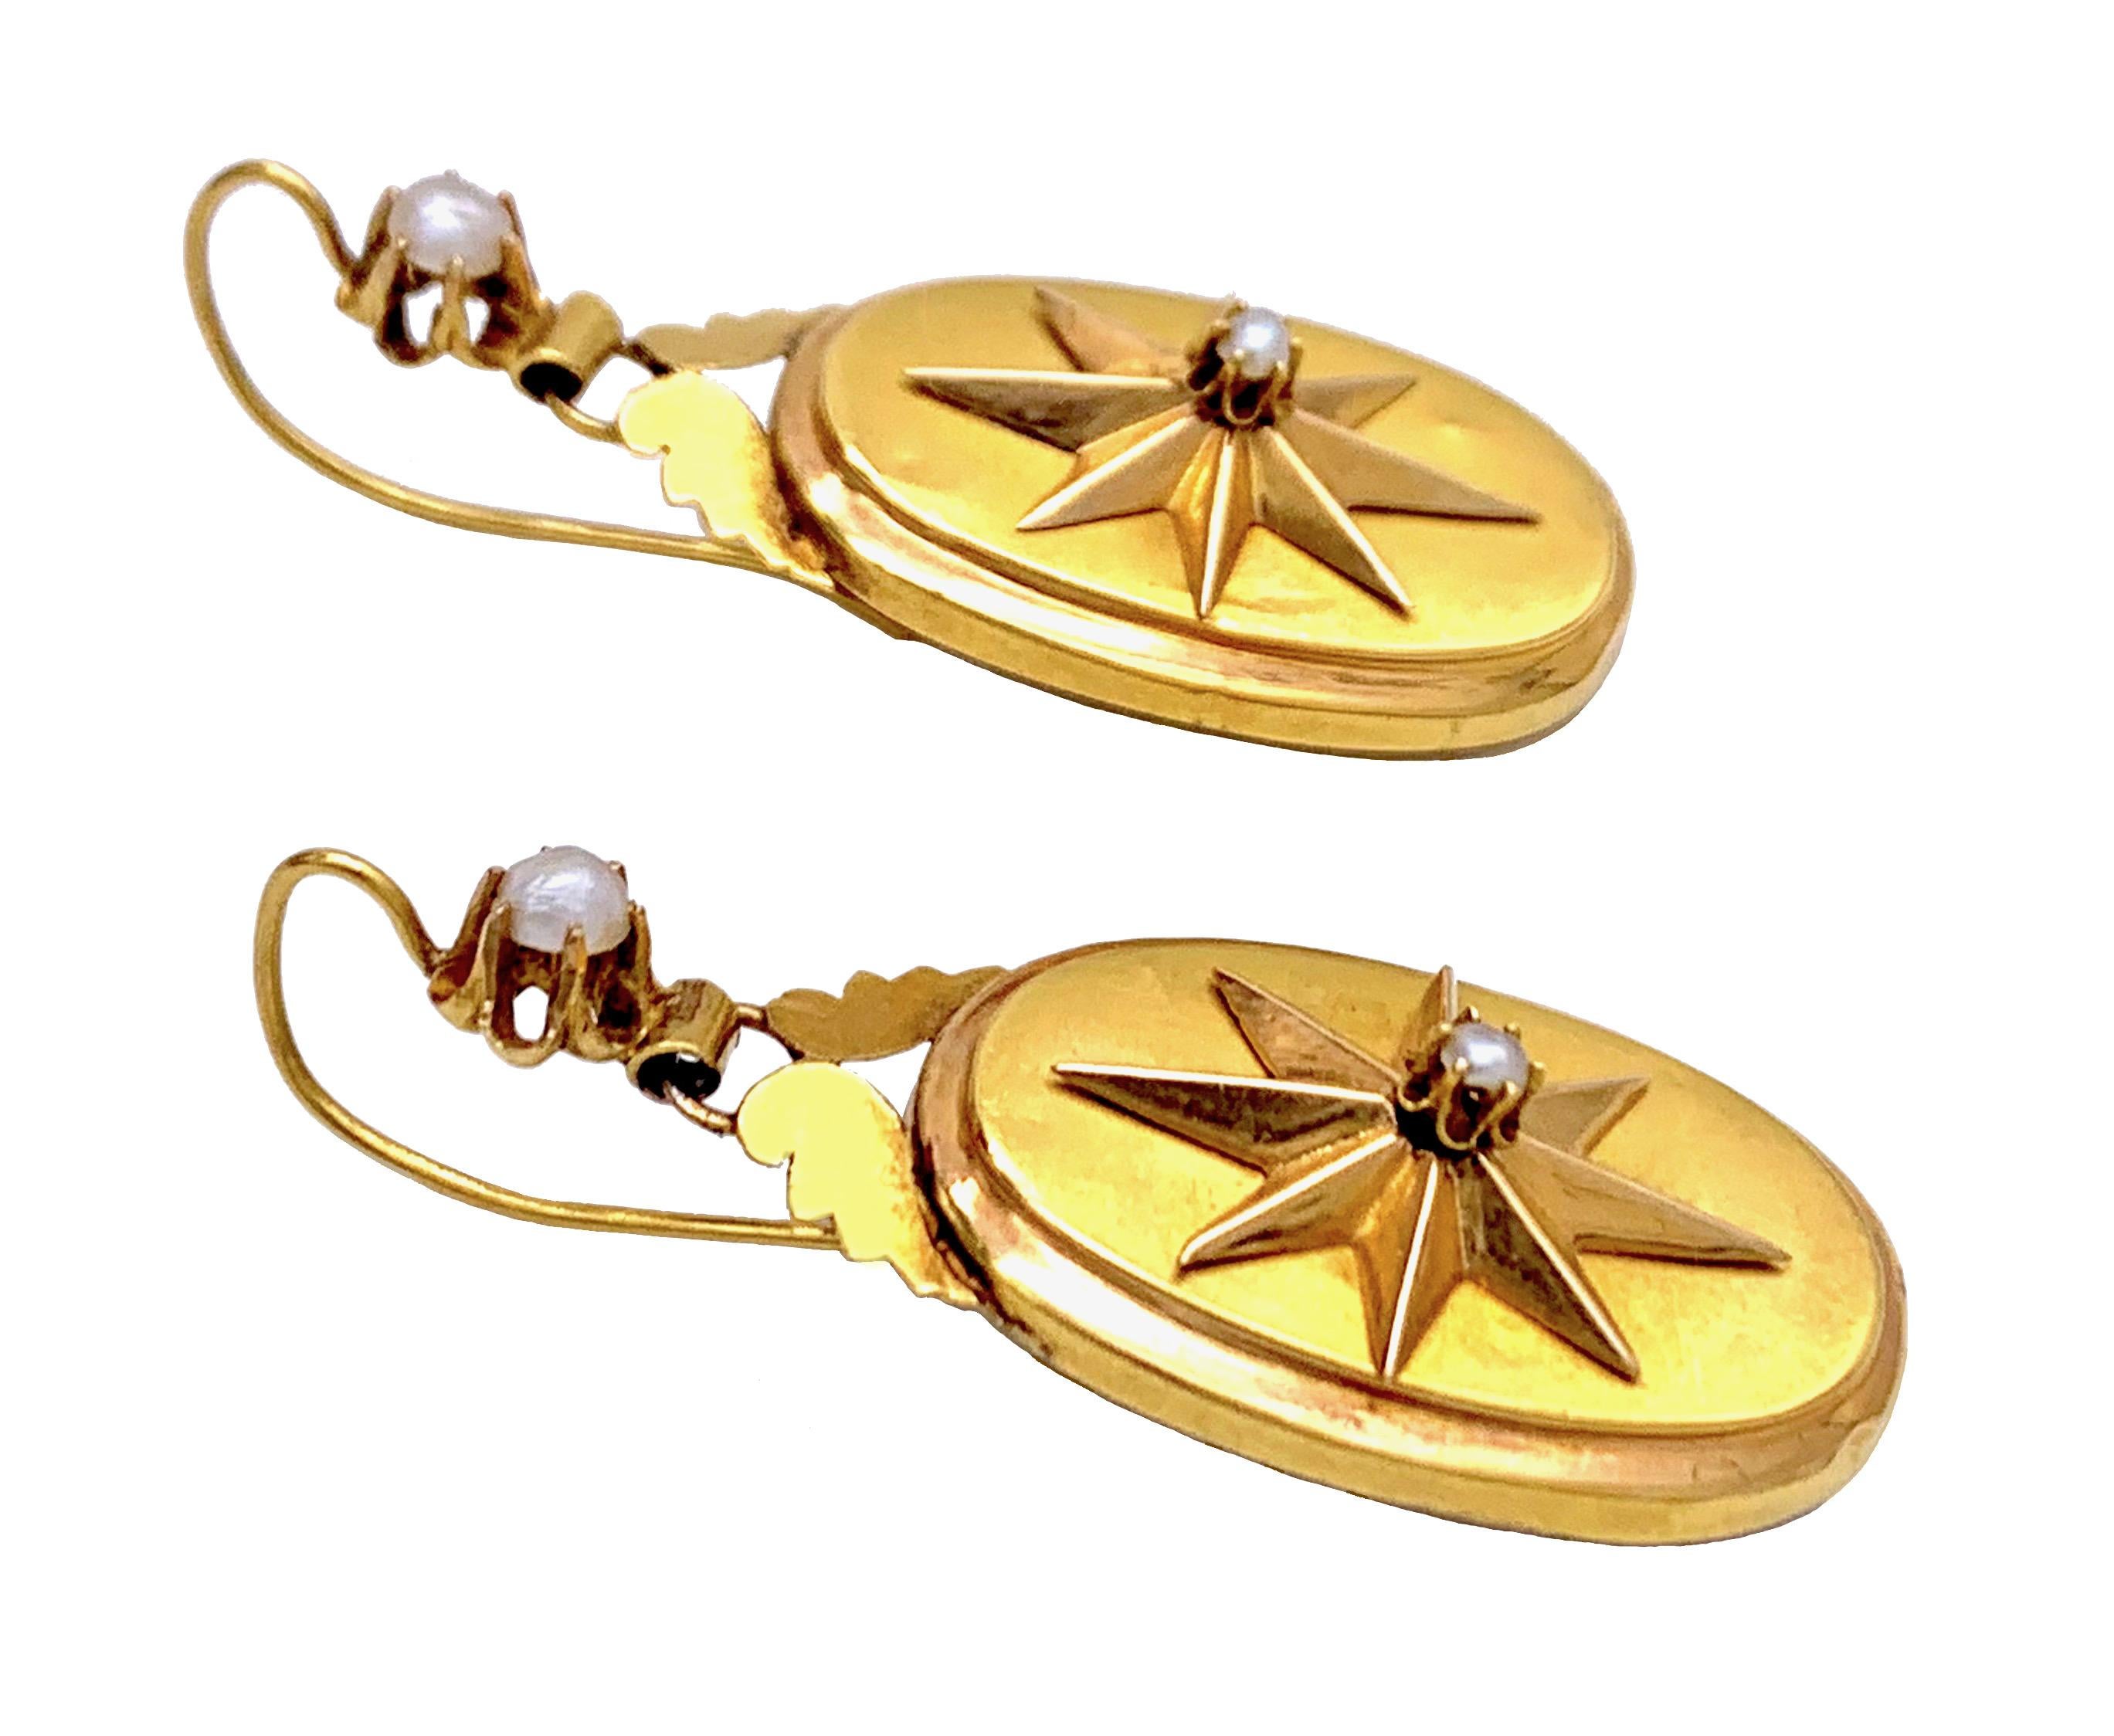 These star earrings were made out of 15 karat gold around 1865. Each earring is decorated with the relief of a star with a natural pearl in the center. The two larger claw set pearls embellish the top of the earrings.